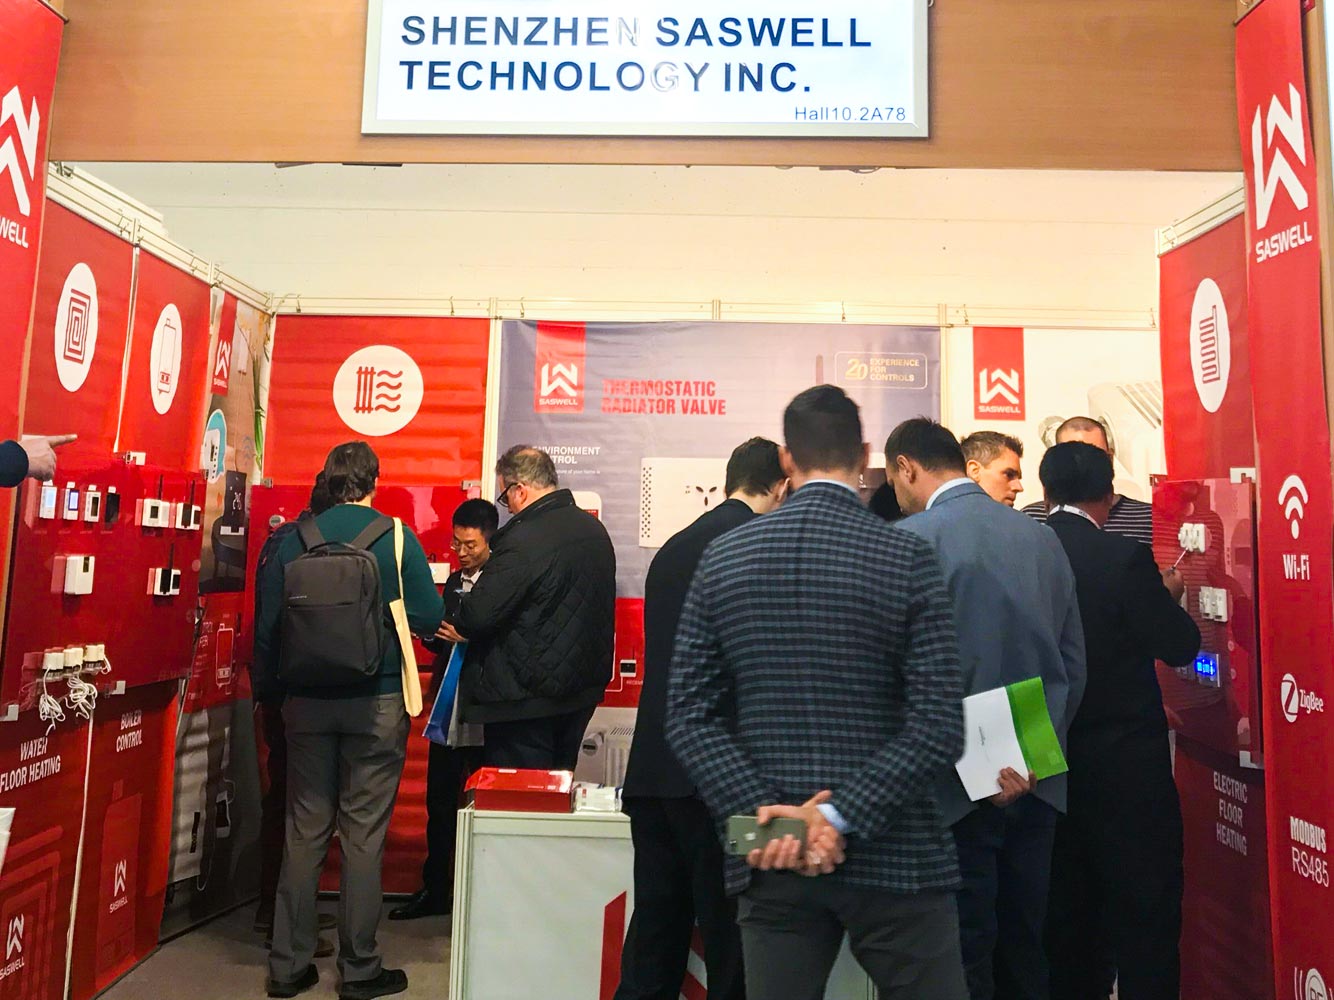 SASWELL at the Frankfurt ISH show in Germany